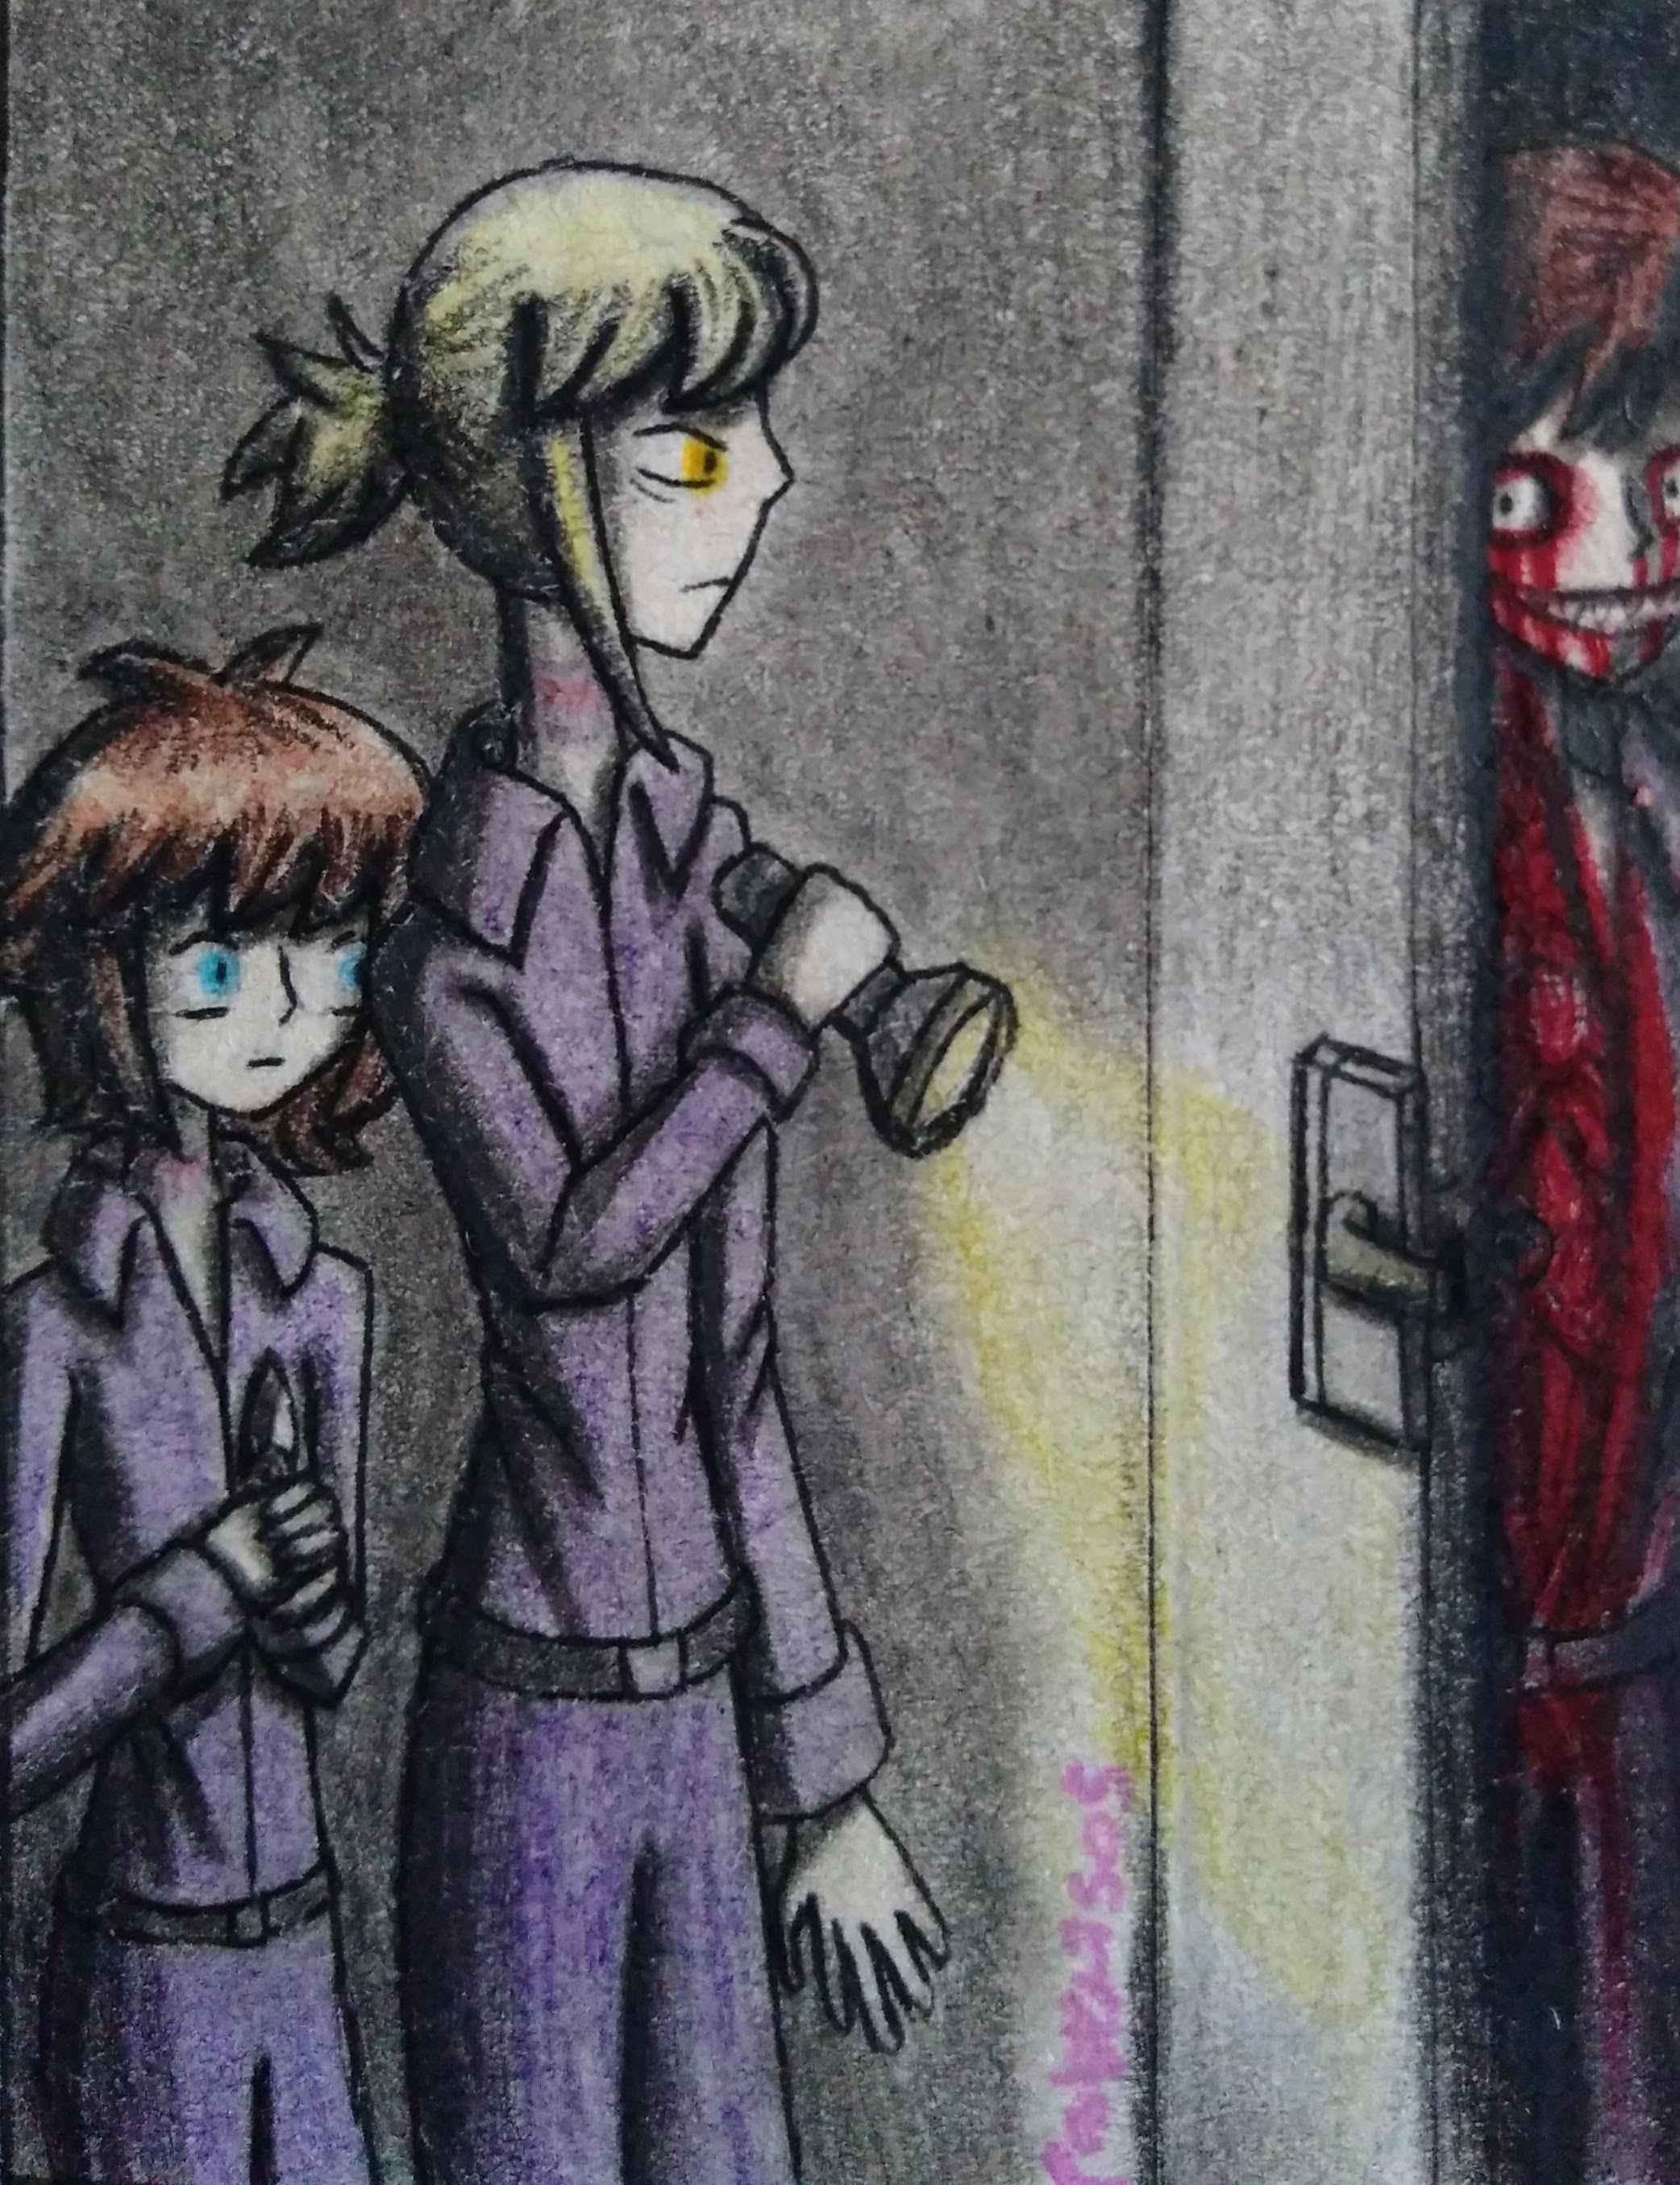 BLOOD] Prelude of Ruin Ness and Gregory [FNAF] by PaigeLTS05 on DeviantArt